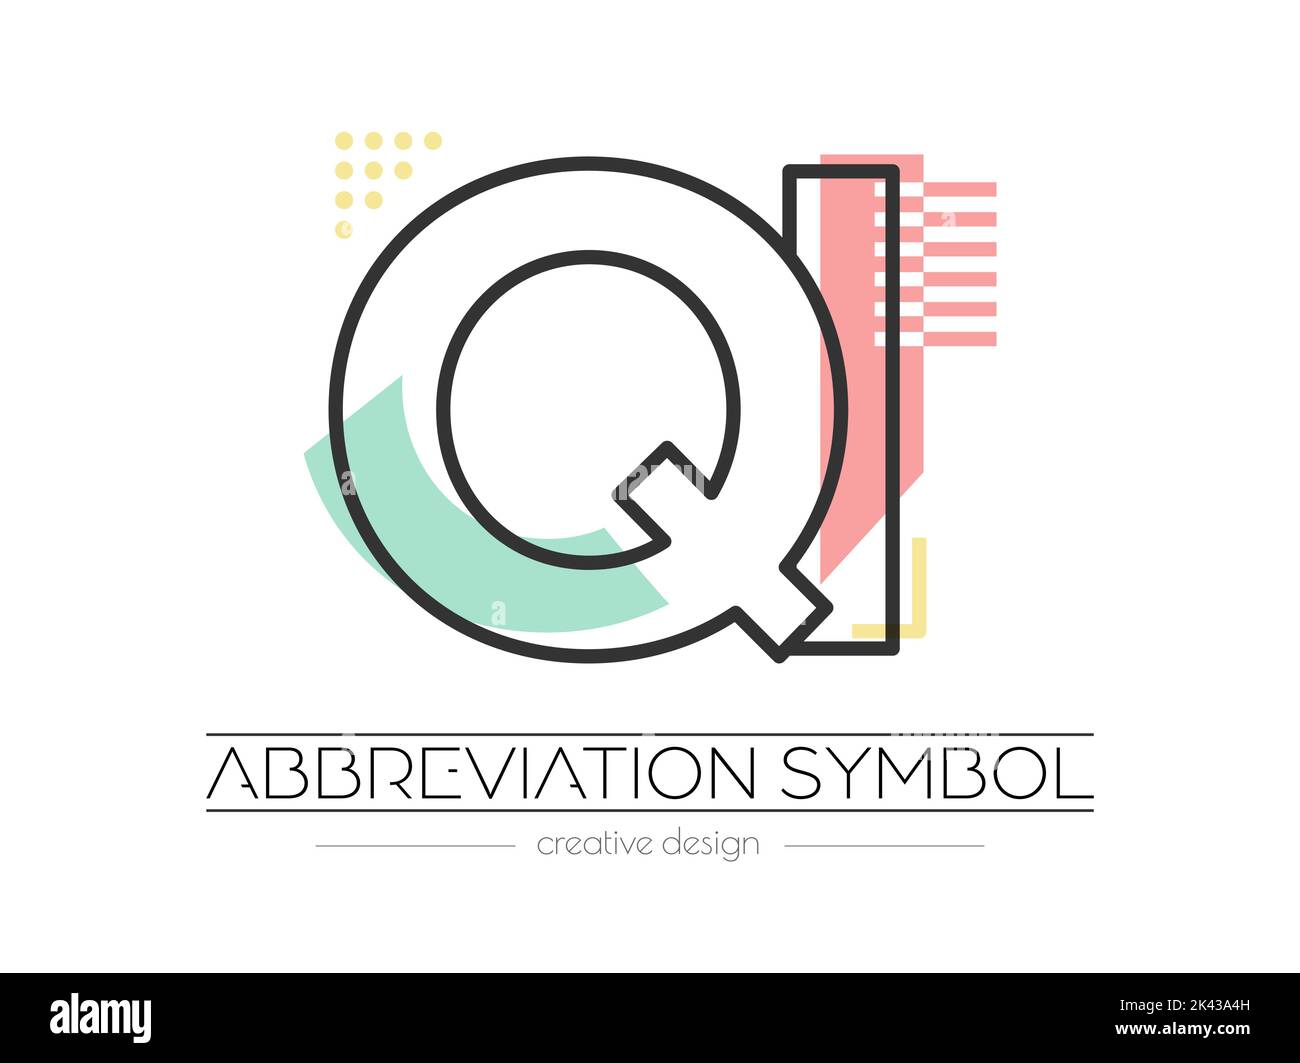 Letters Q and I. Merging of two letters. Initials logo or abbreviation symbol. Vector illustration for creative design and creative ideas. Flat style. Stock Vector